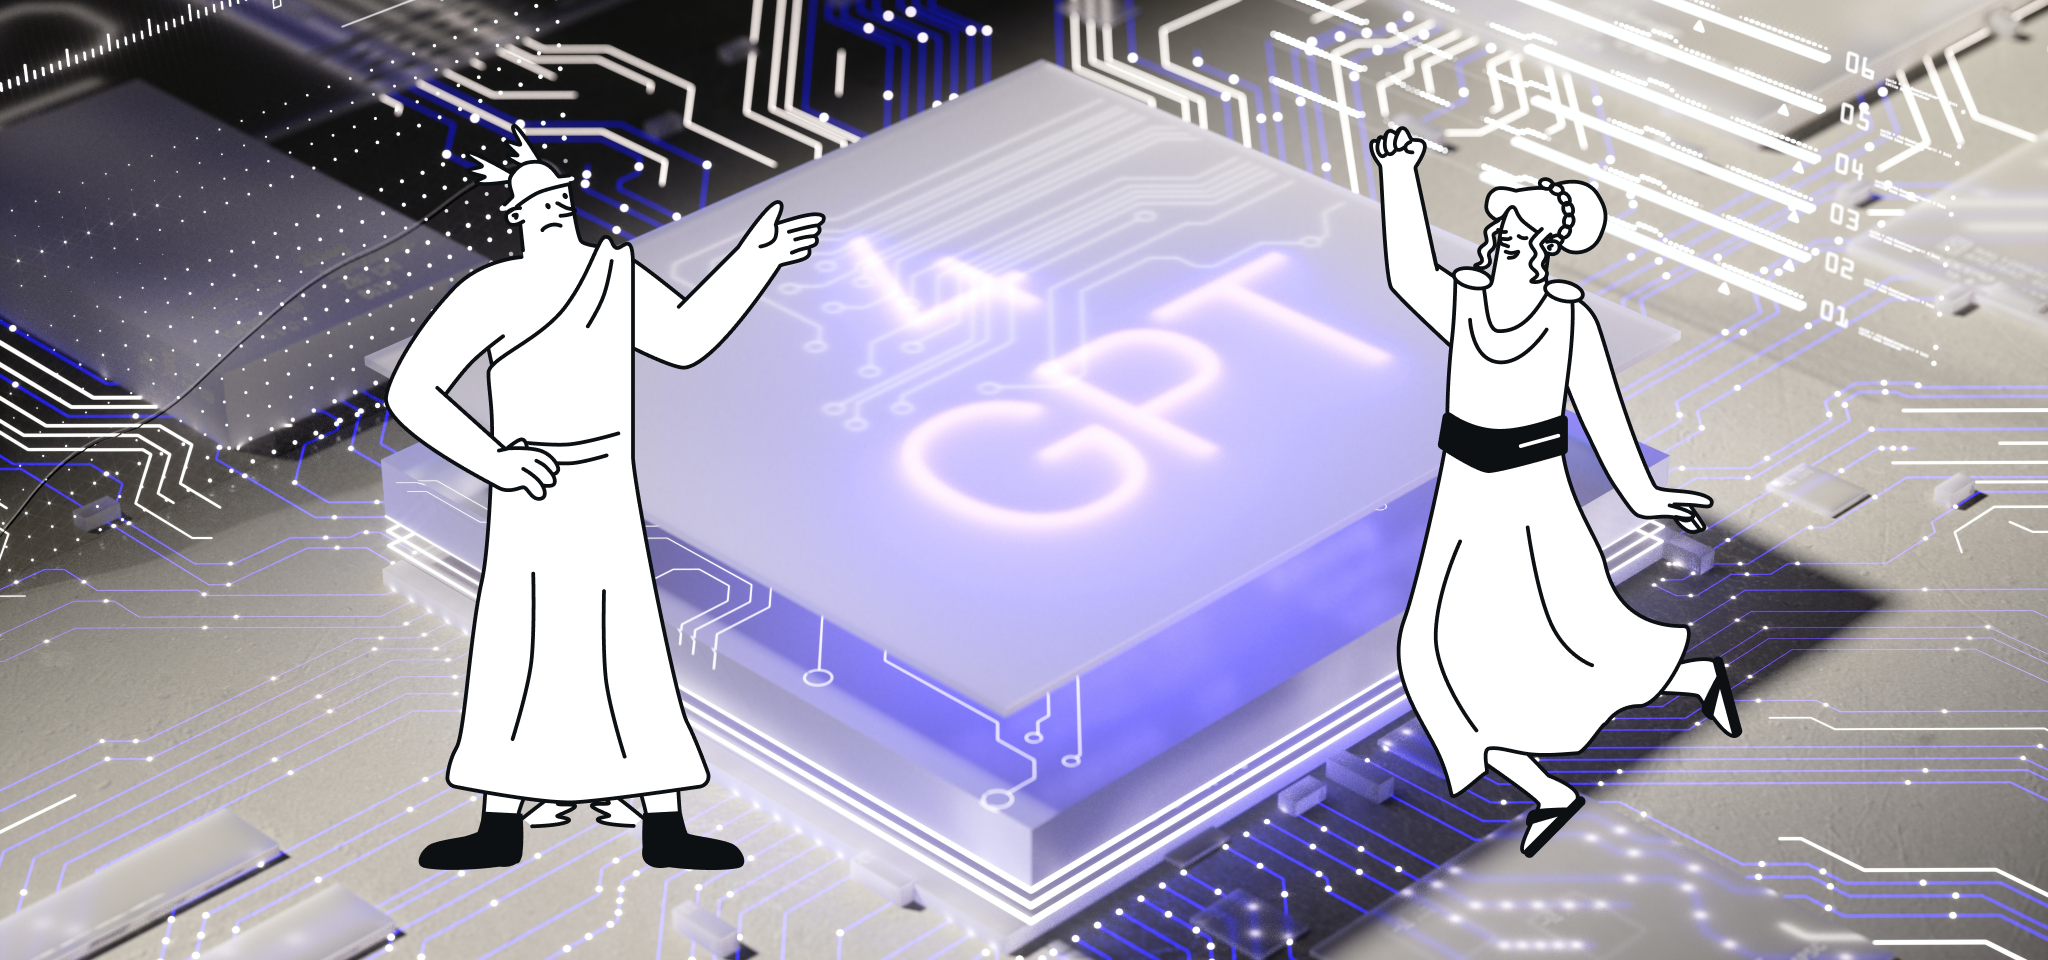 A worried god and an enthusiastic goddess in front of a ChatGPT branded microchip